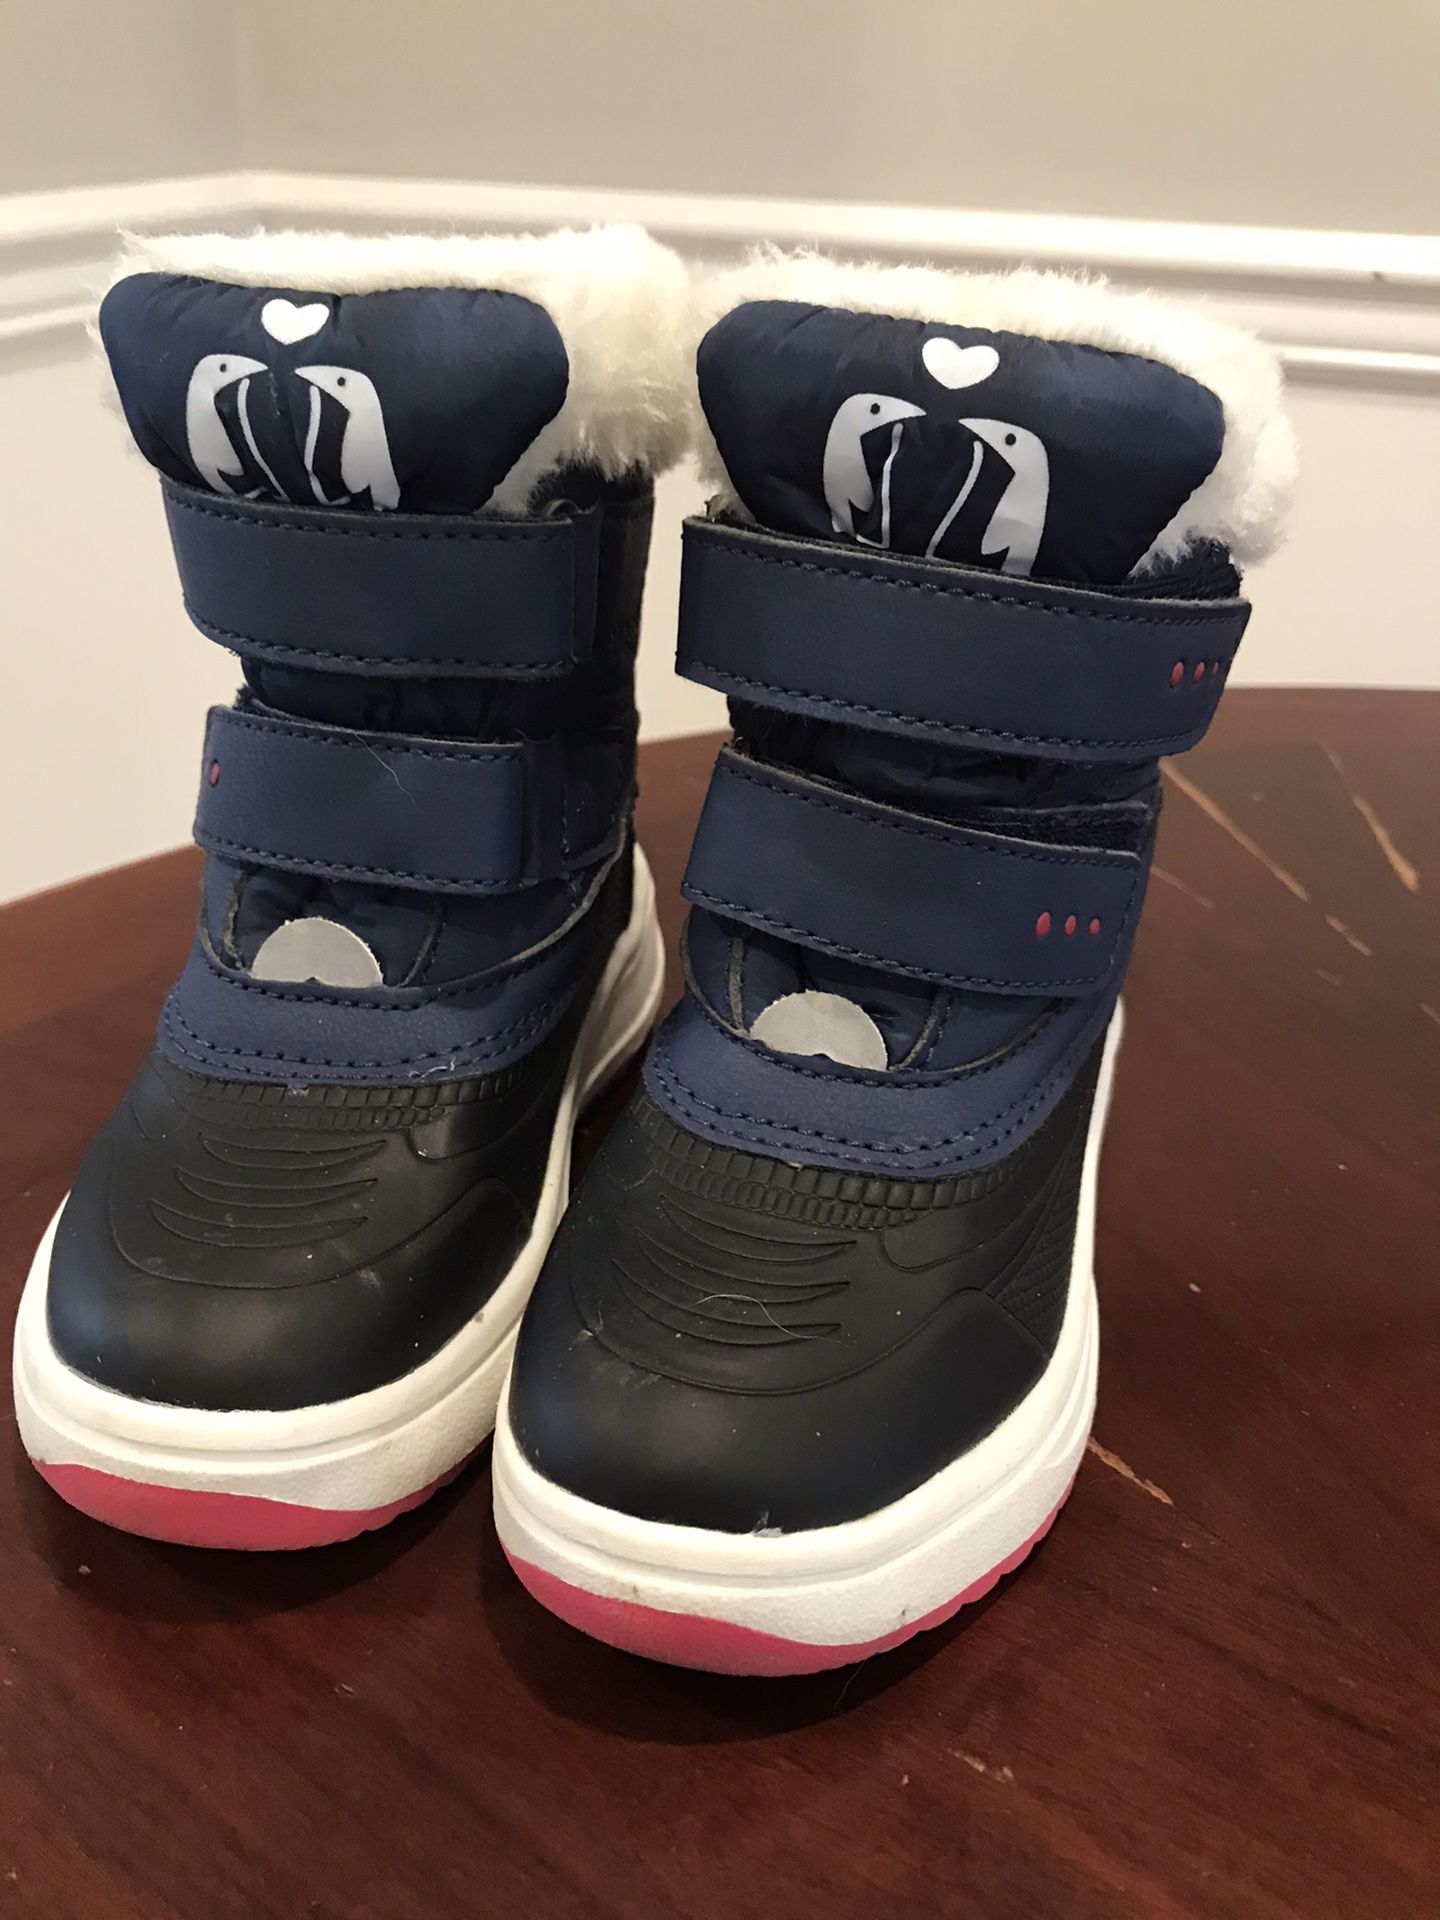 Snow boots for Toddler girl size 7 (or 6)